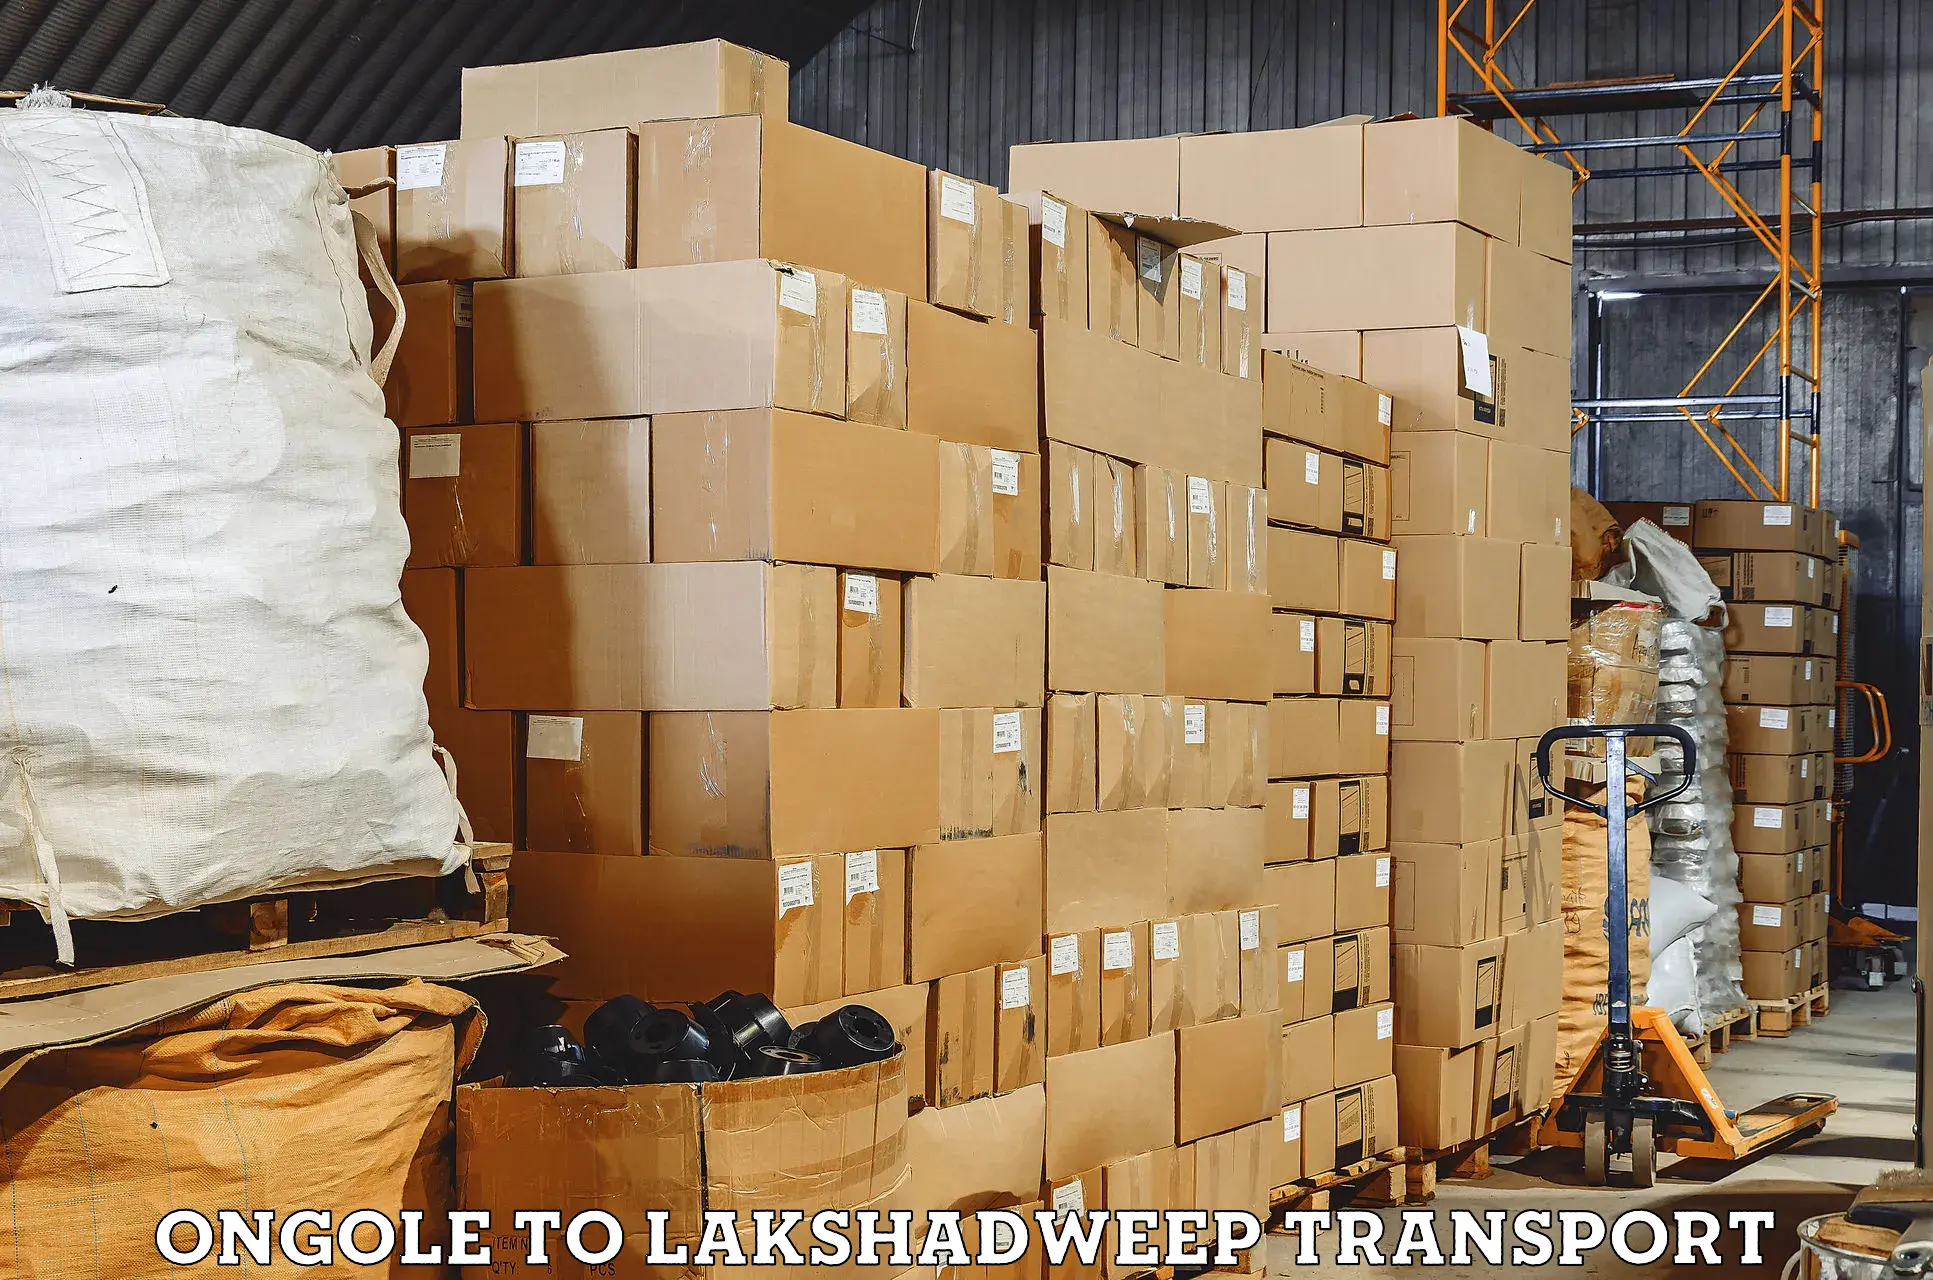 Online transport service Ongole to Lakshadweep